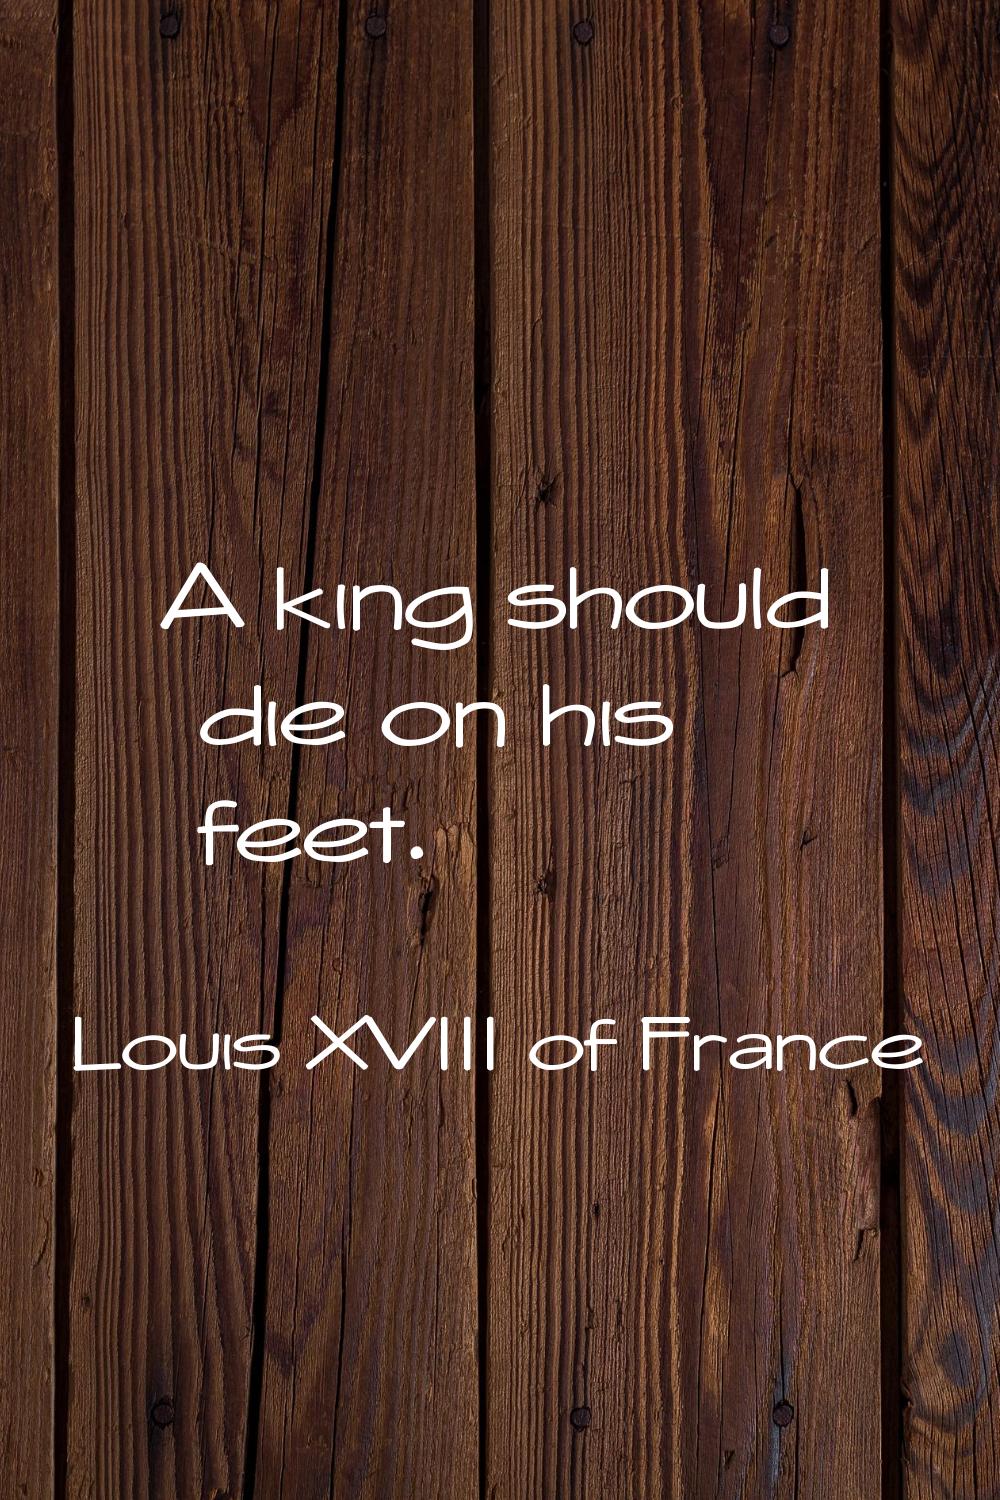 A king should die on his feet.